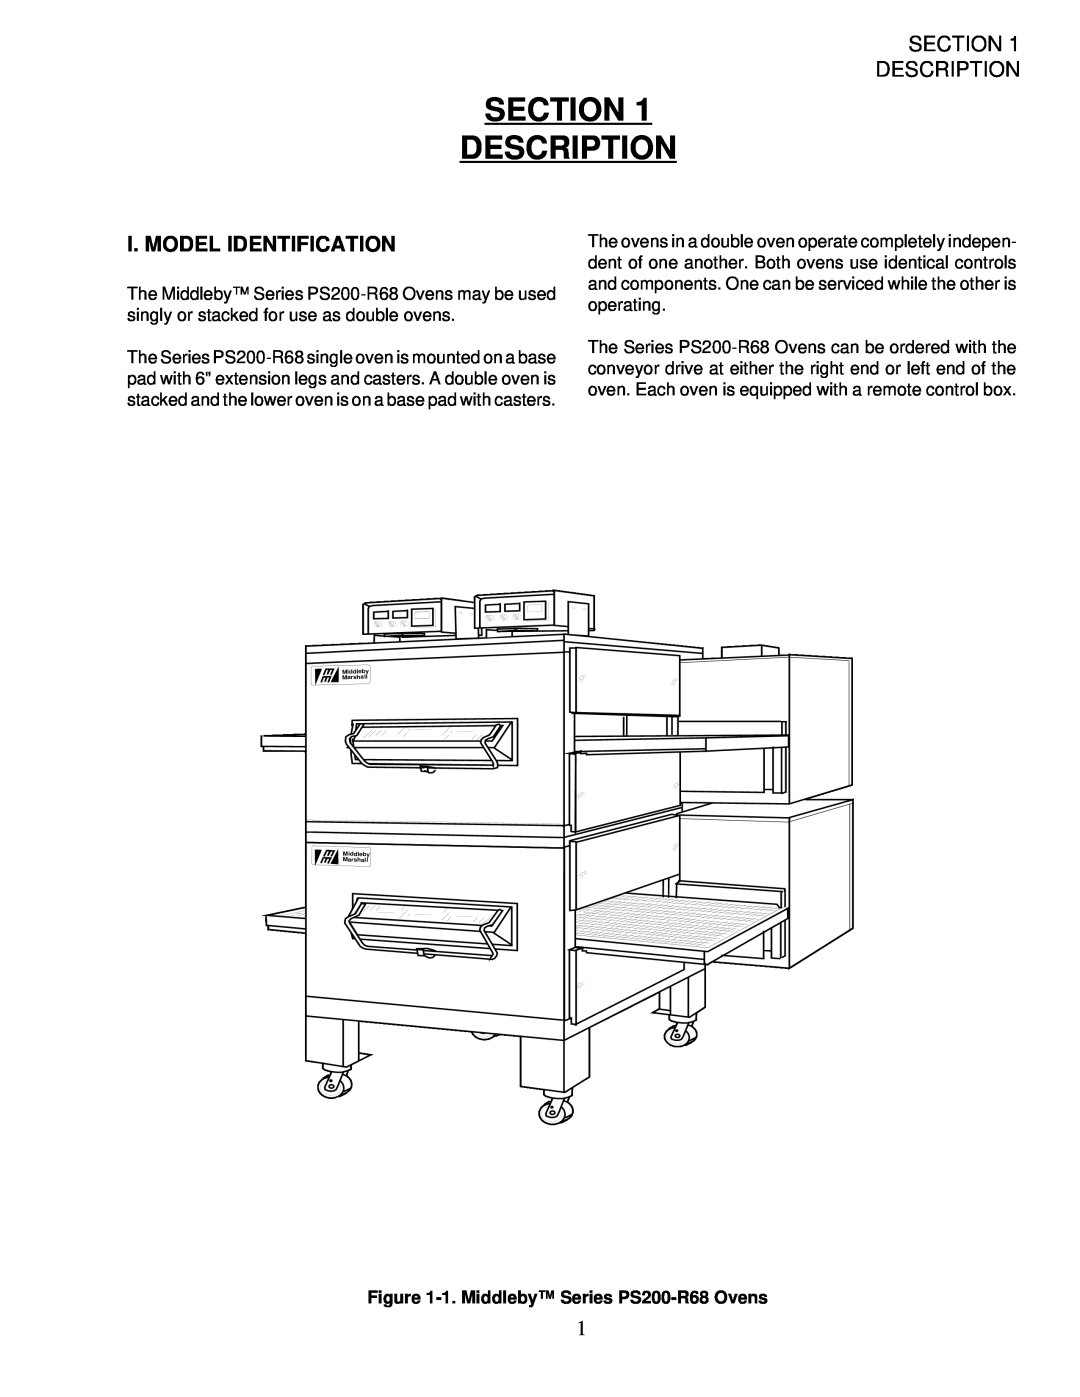 Middleby Cooking Systems Group PS200-R68 manual Section Description, I. Model Identification 